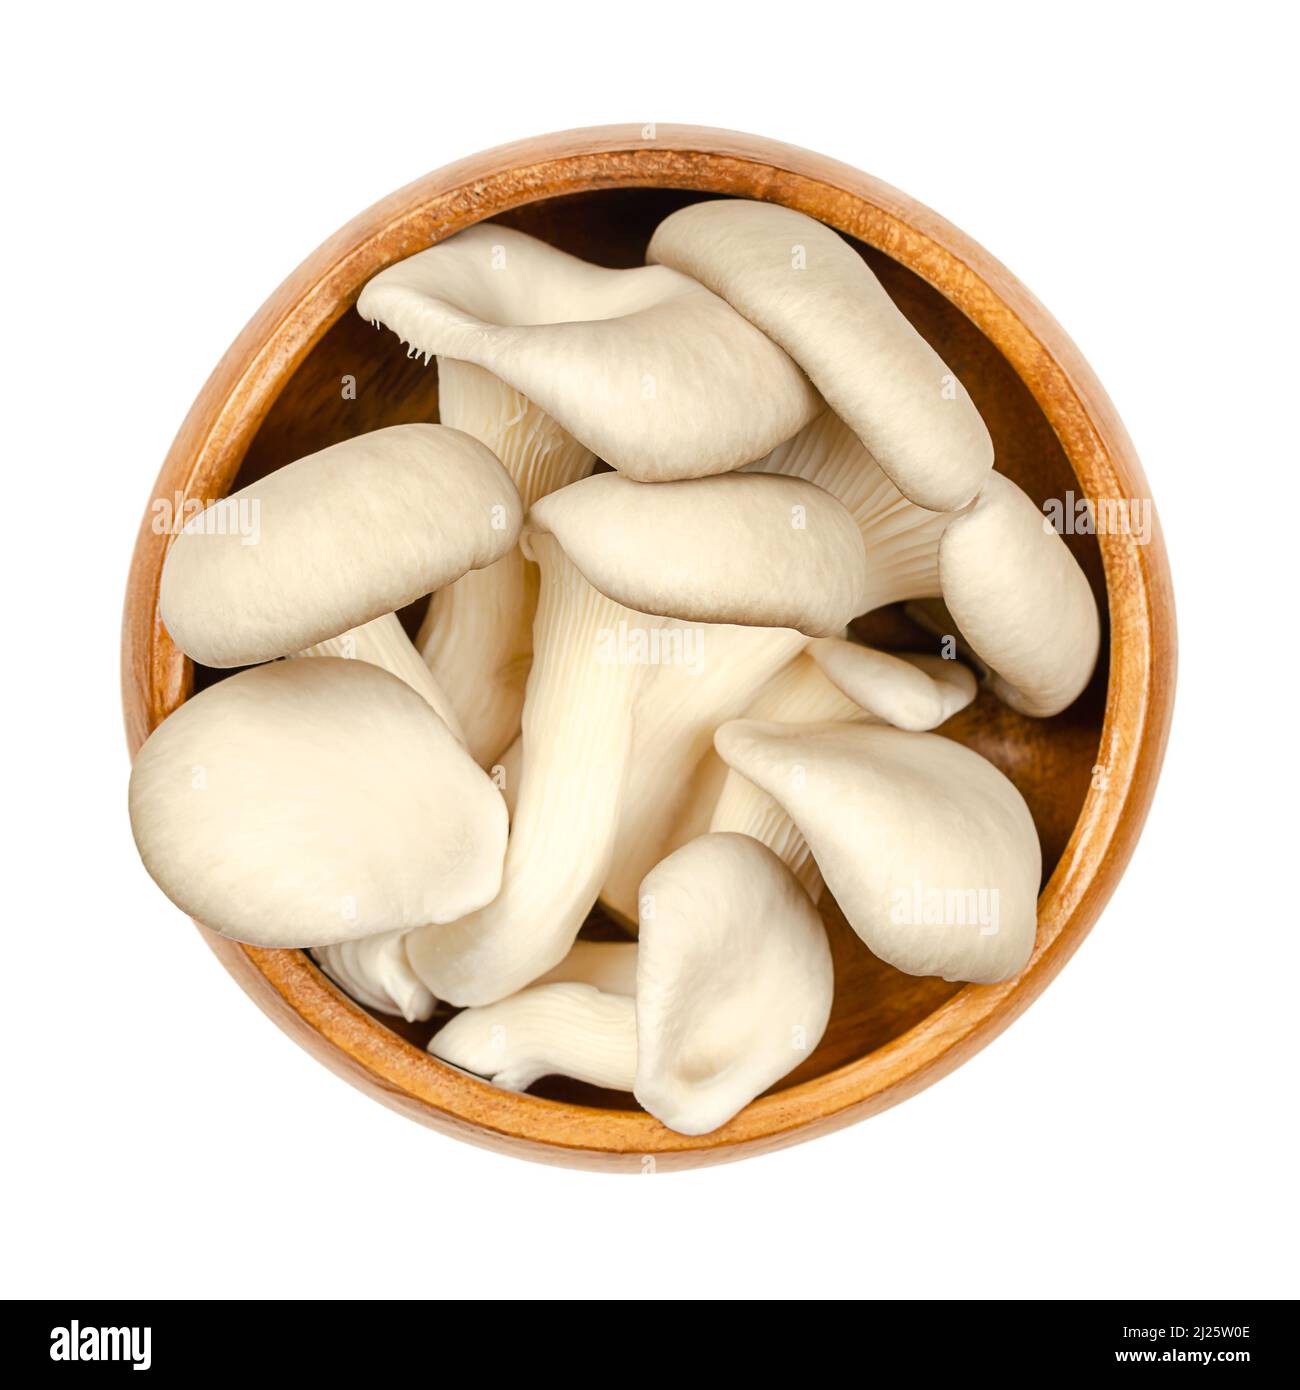 Fresh oyster mushrooms, in a wooden bowl. Pleurotus, also known as abalone or tree mushrooms. One of most widely cultivated and eaten mushrooms. Stock Photo